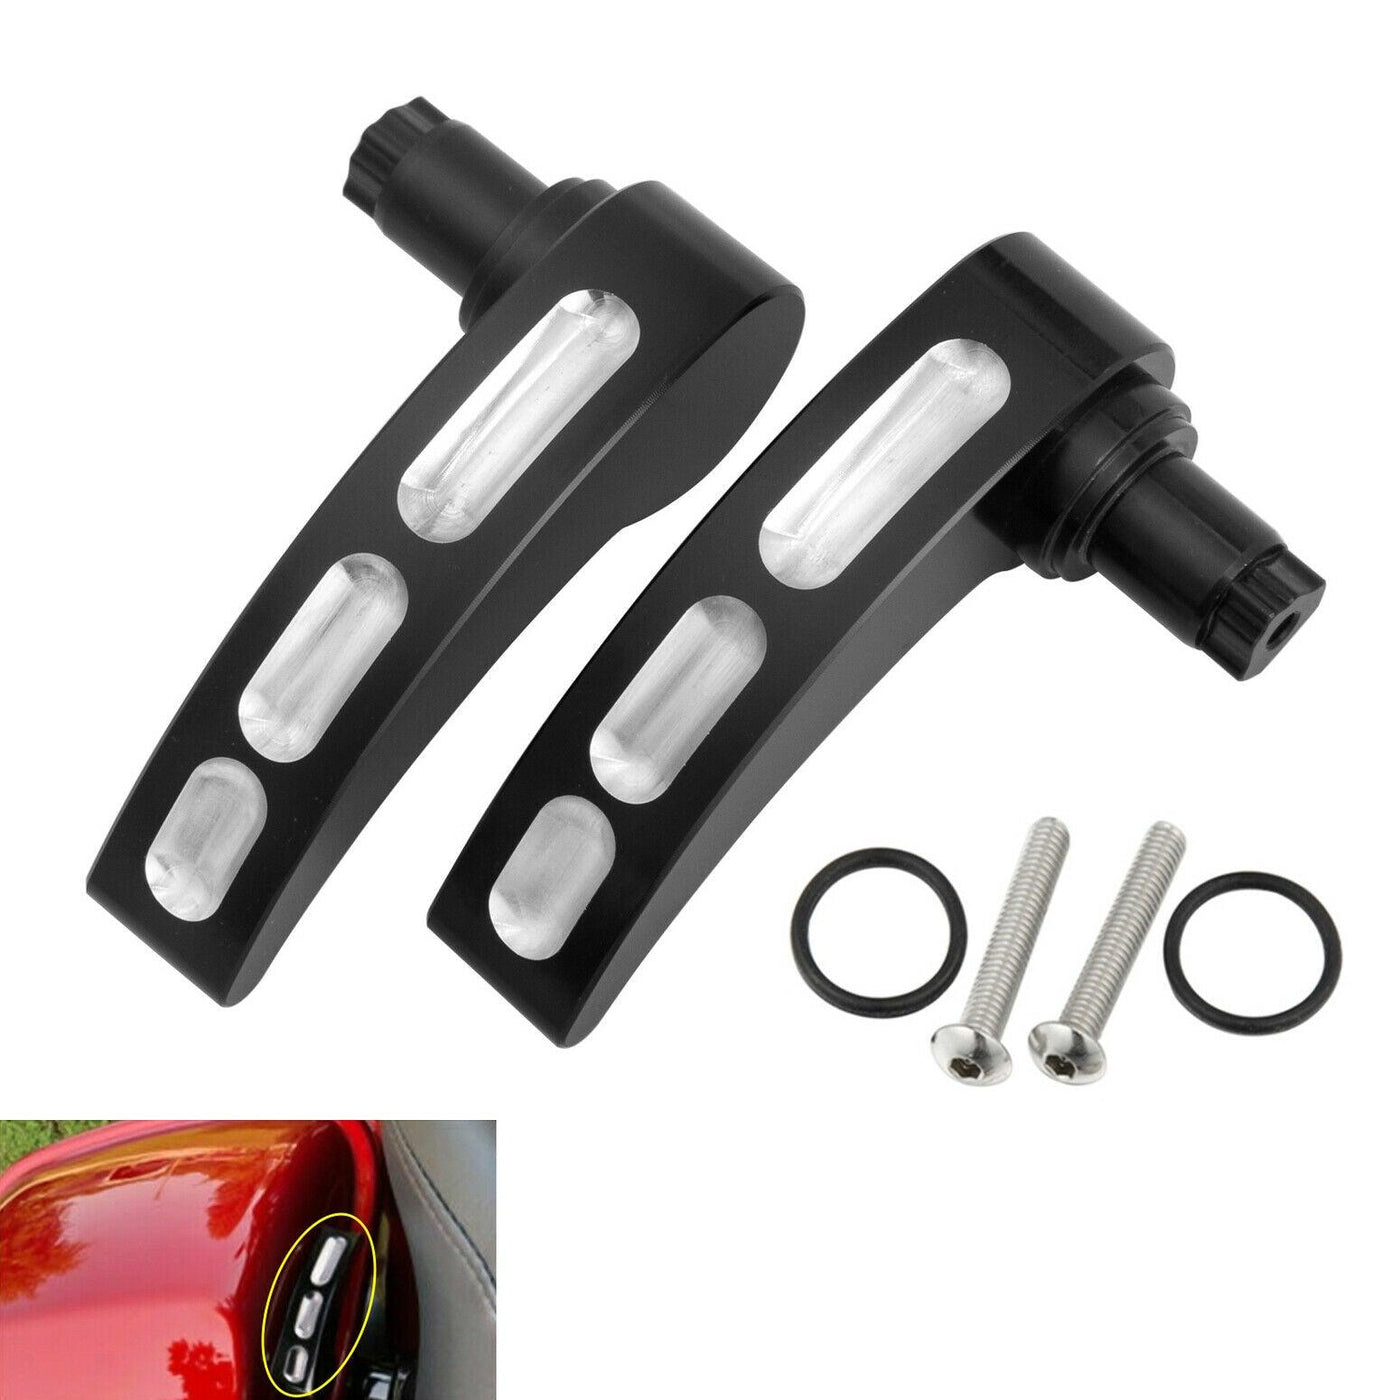 2xSaddlebag Lifter Latch Handle Lever Fit for Harley Touring Electra Glide 14-up - Moto Life Products